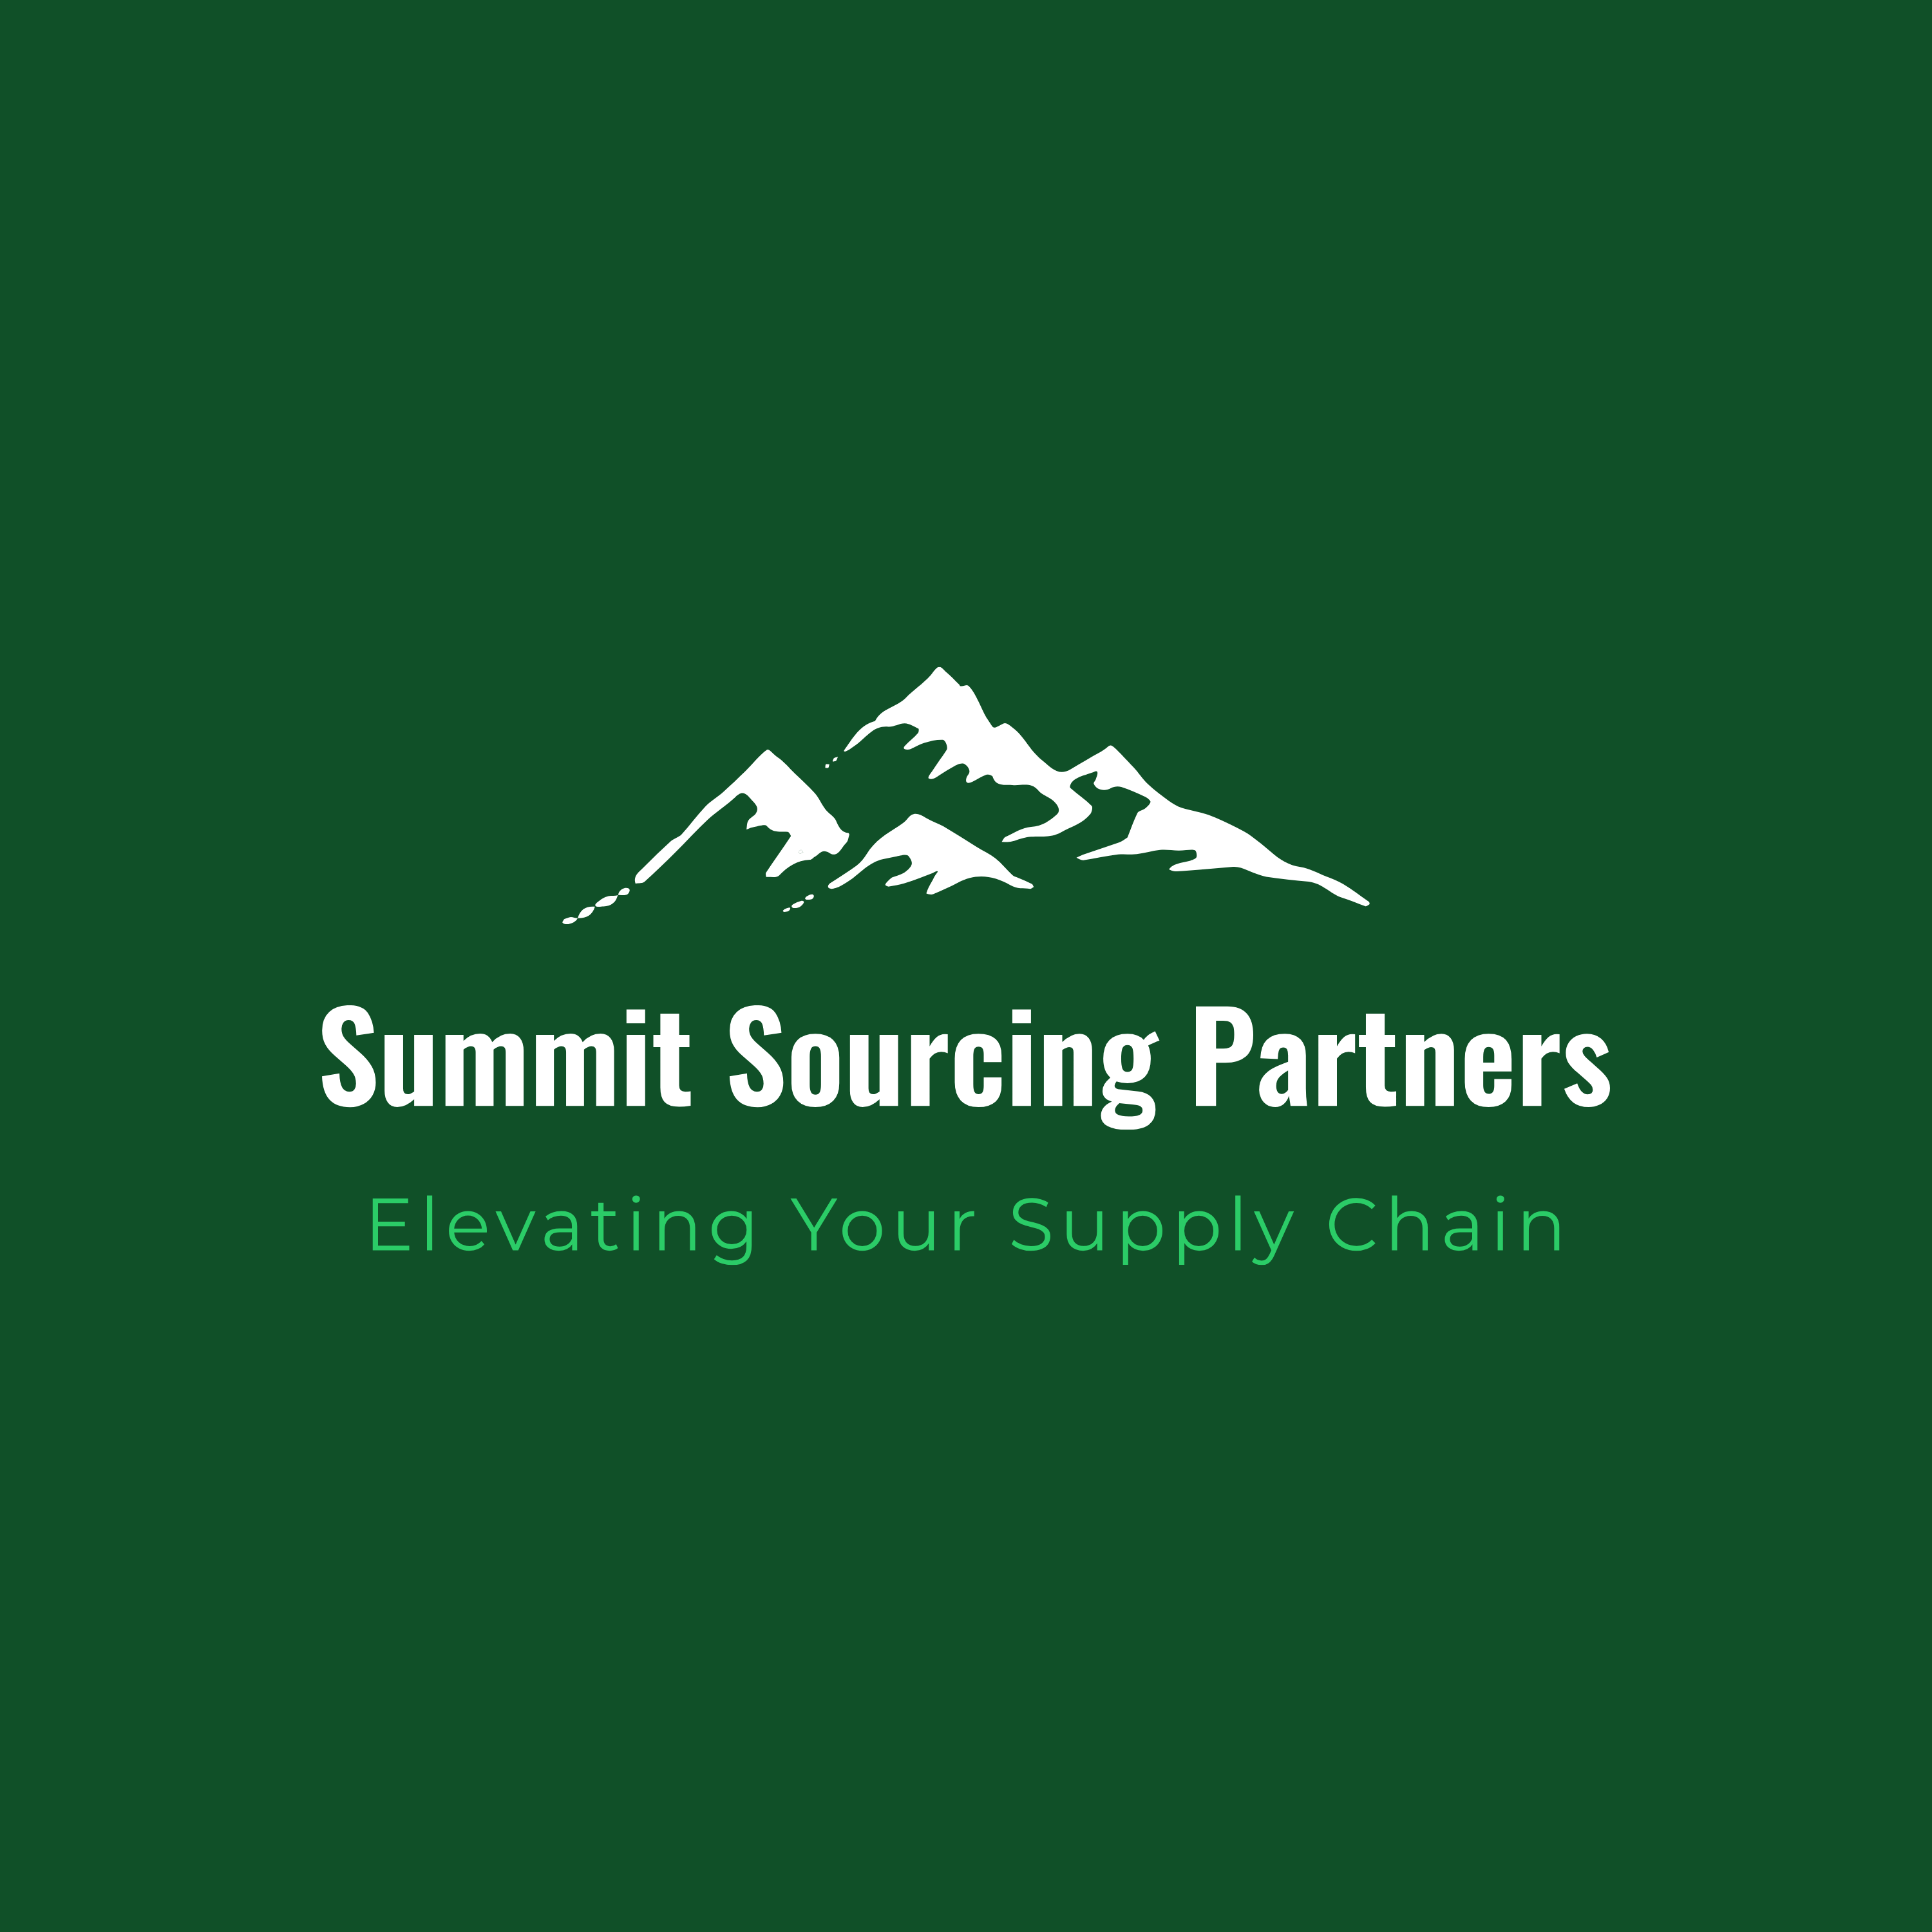 Summit Sourcing Partners: Elevating Your Supply Chain